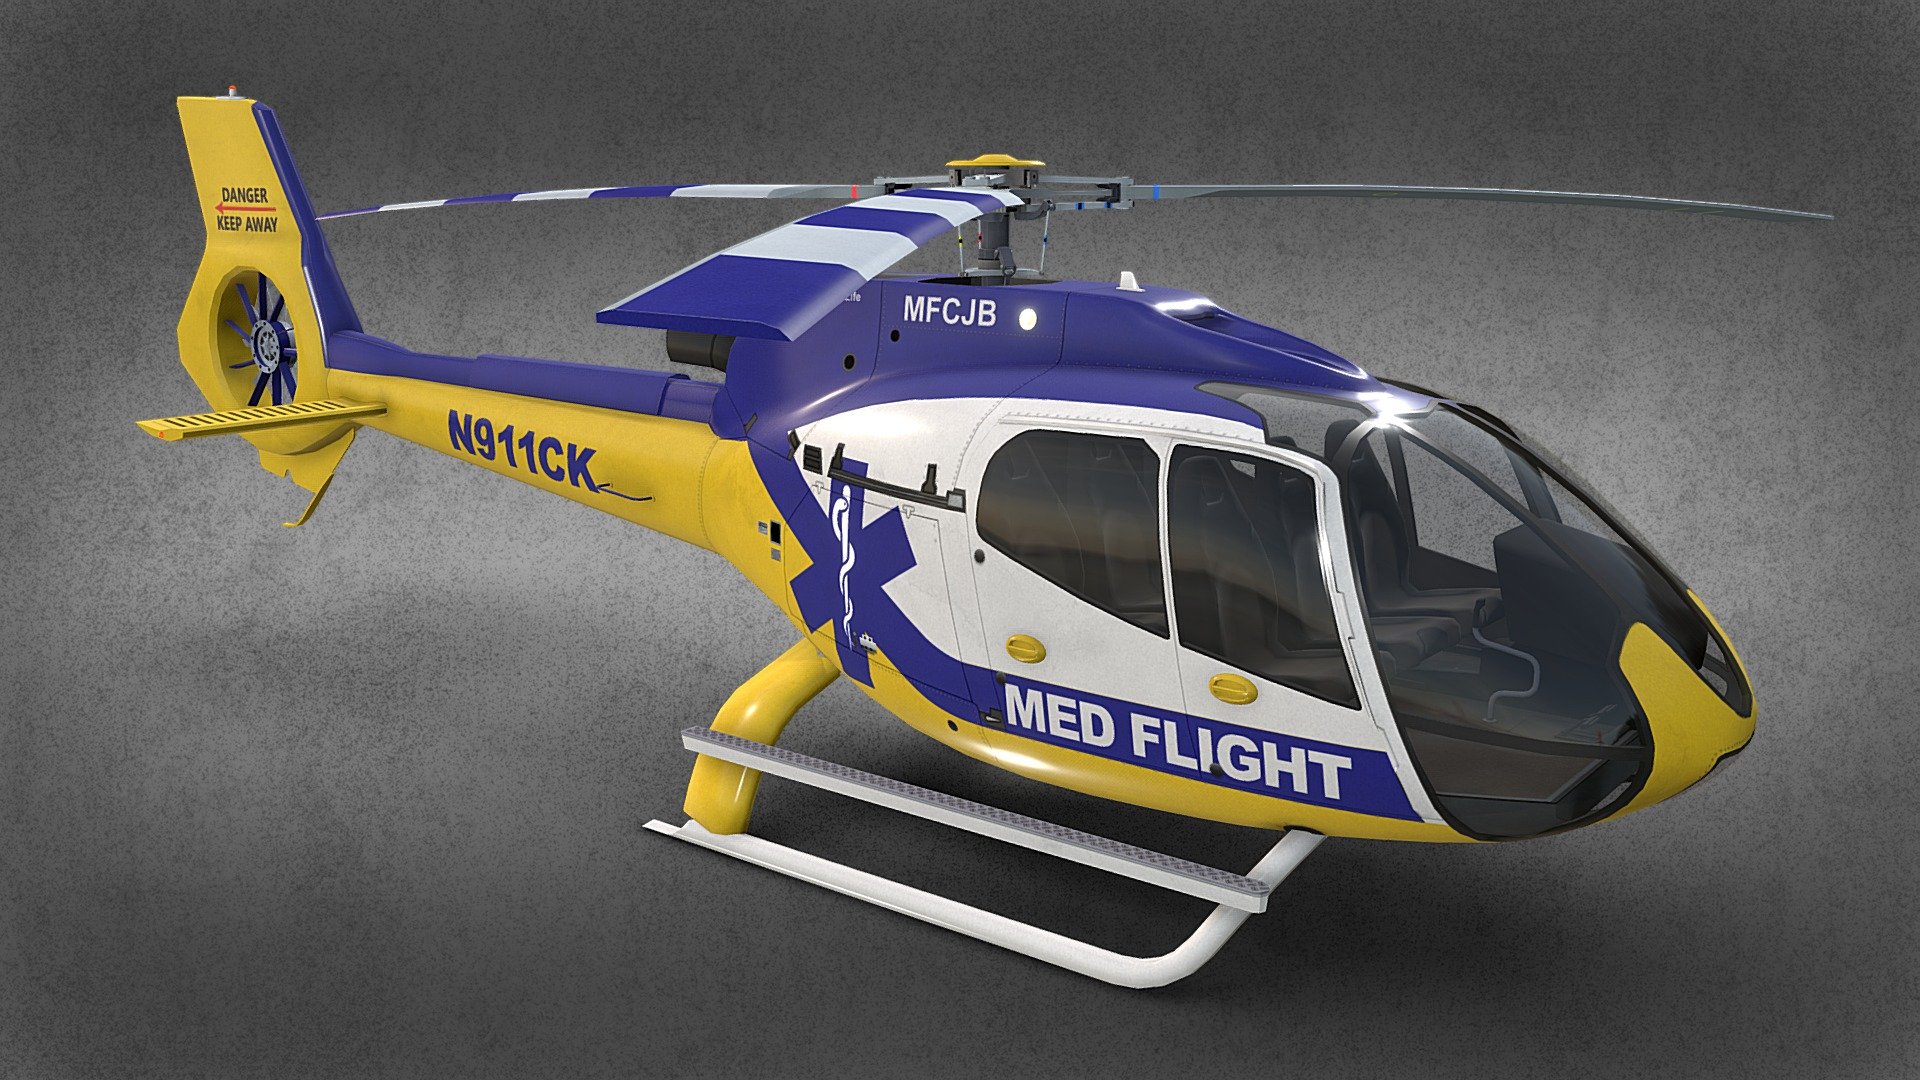 Med Flight Helicopter Airbus H130 Livery 22

Strongly realtime optimized helicopter with high visual accuracy

Game ready and cross game engines friendly asset

Both PBR workflows ready native 4096 x 4096 px textures

Decreasing to 2K and even 1K results in a still decent looking helicopter

Clean lowpoly mesh with 4 preconfigured level of details

LOD0 19710 tris, LOD1 10462 tris, LOD2 7388 tris, LOD3 5990 tris

Properly placed rotors pivots for flawless rotations

Simple capsule built interior that fits perfectly the body

100% human controlled and partly manually done triangulation

100% unwrapped non-overlapping

Made using blueprints in real world scale meters

Included files are flawless and clean

All LOD are exported seperately and together in each file format

Collection: https://skfb.ly/oLpDV
 - Med Flight Helicopter Airbus H130 Livery 22 - Buy Royalty Free 3D model by RealtimeModels 3d model